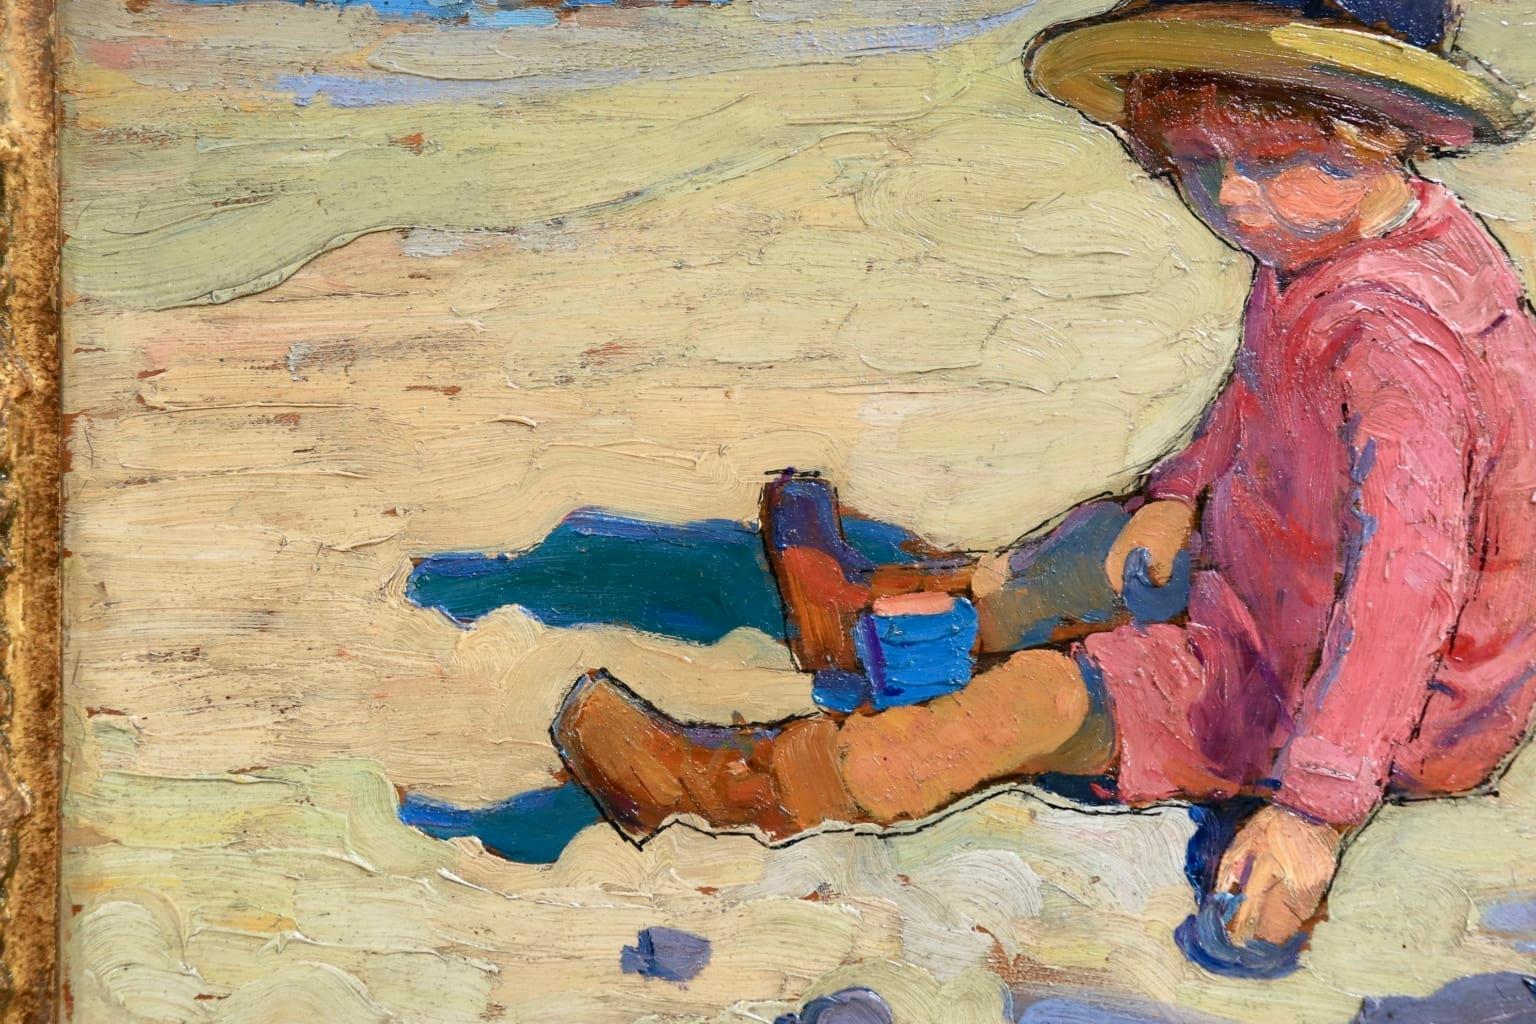 A simply beautiful French Impressionist School oil on panel of a young girl in a boater hat sitting on a sandy beach playing with pebbles with a view of vibrant blue sea in the distance. This work is signed with the signature of Berthe Morisot lower